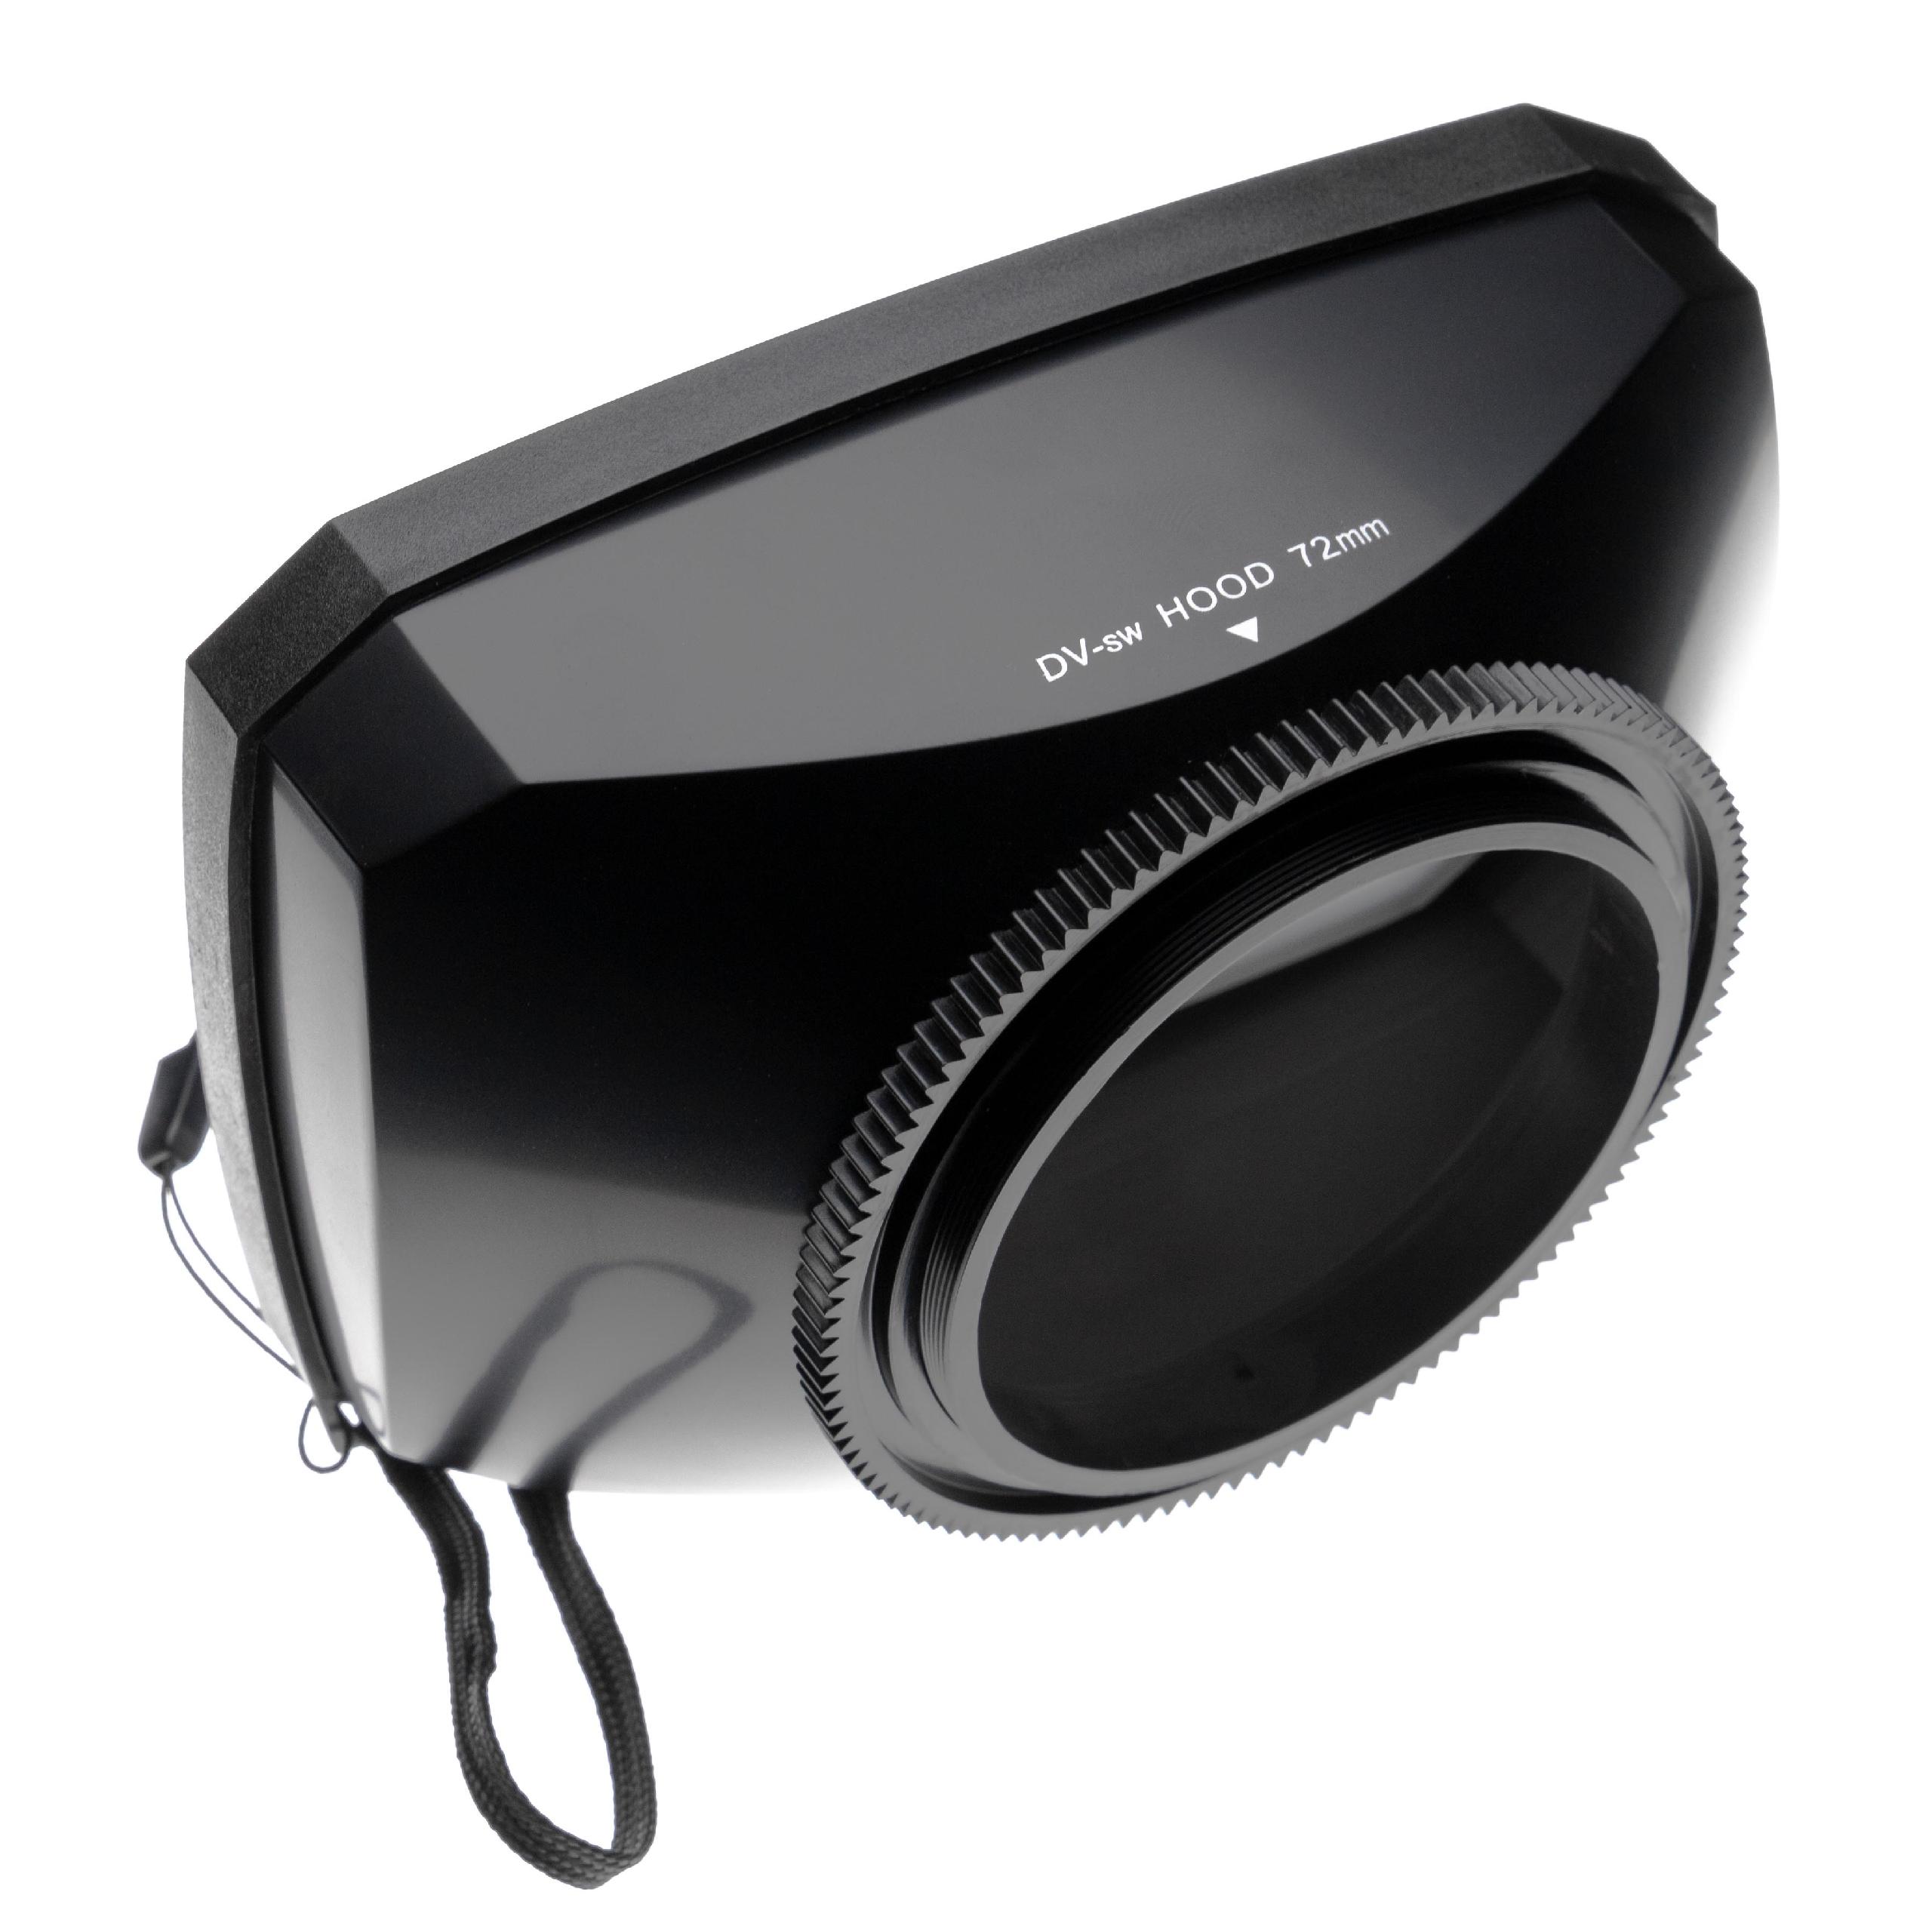 Lens Hood with White Balance Lens Cap for Cameras with 72 mm Filter Thread - 16:9 Format 